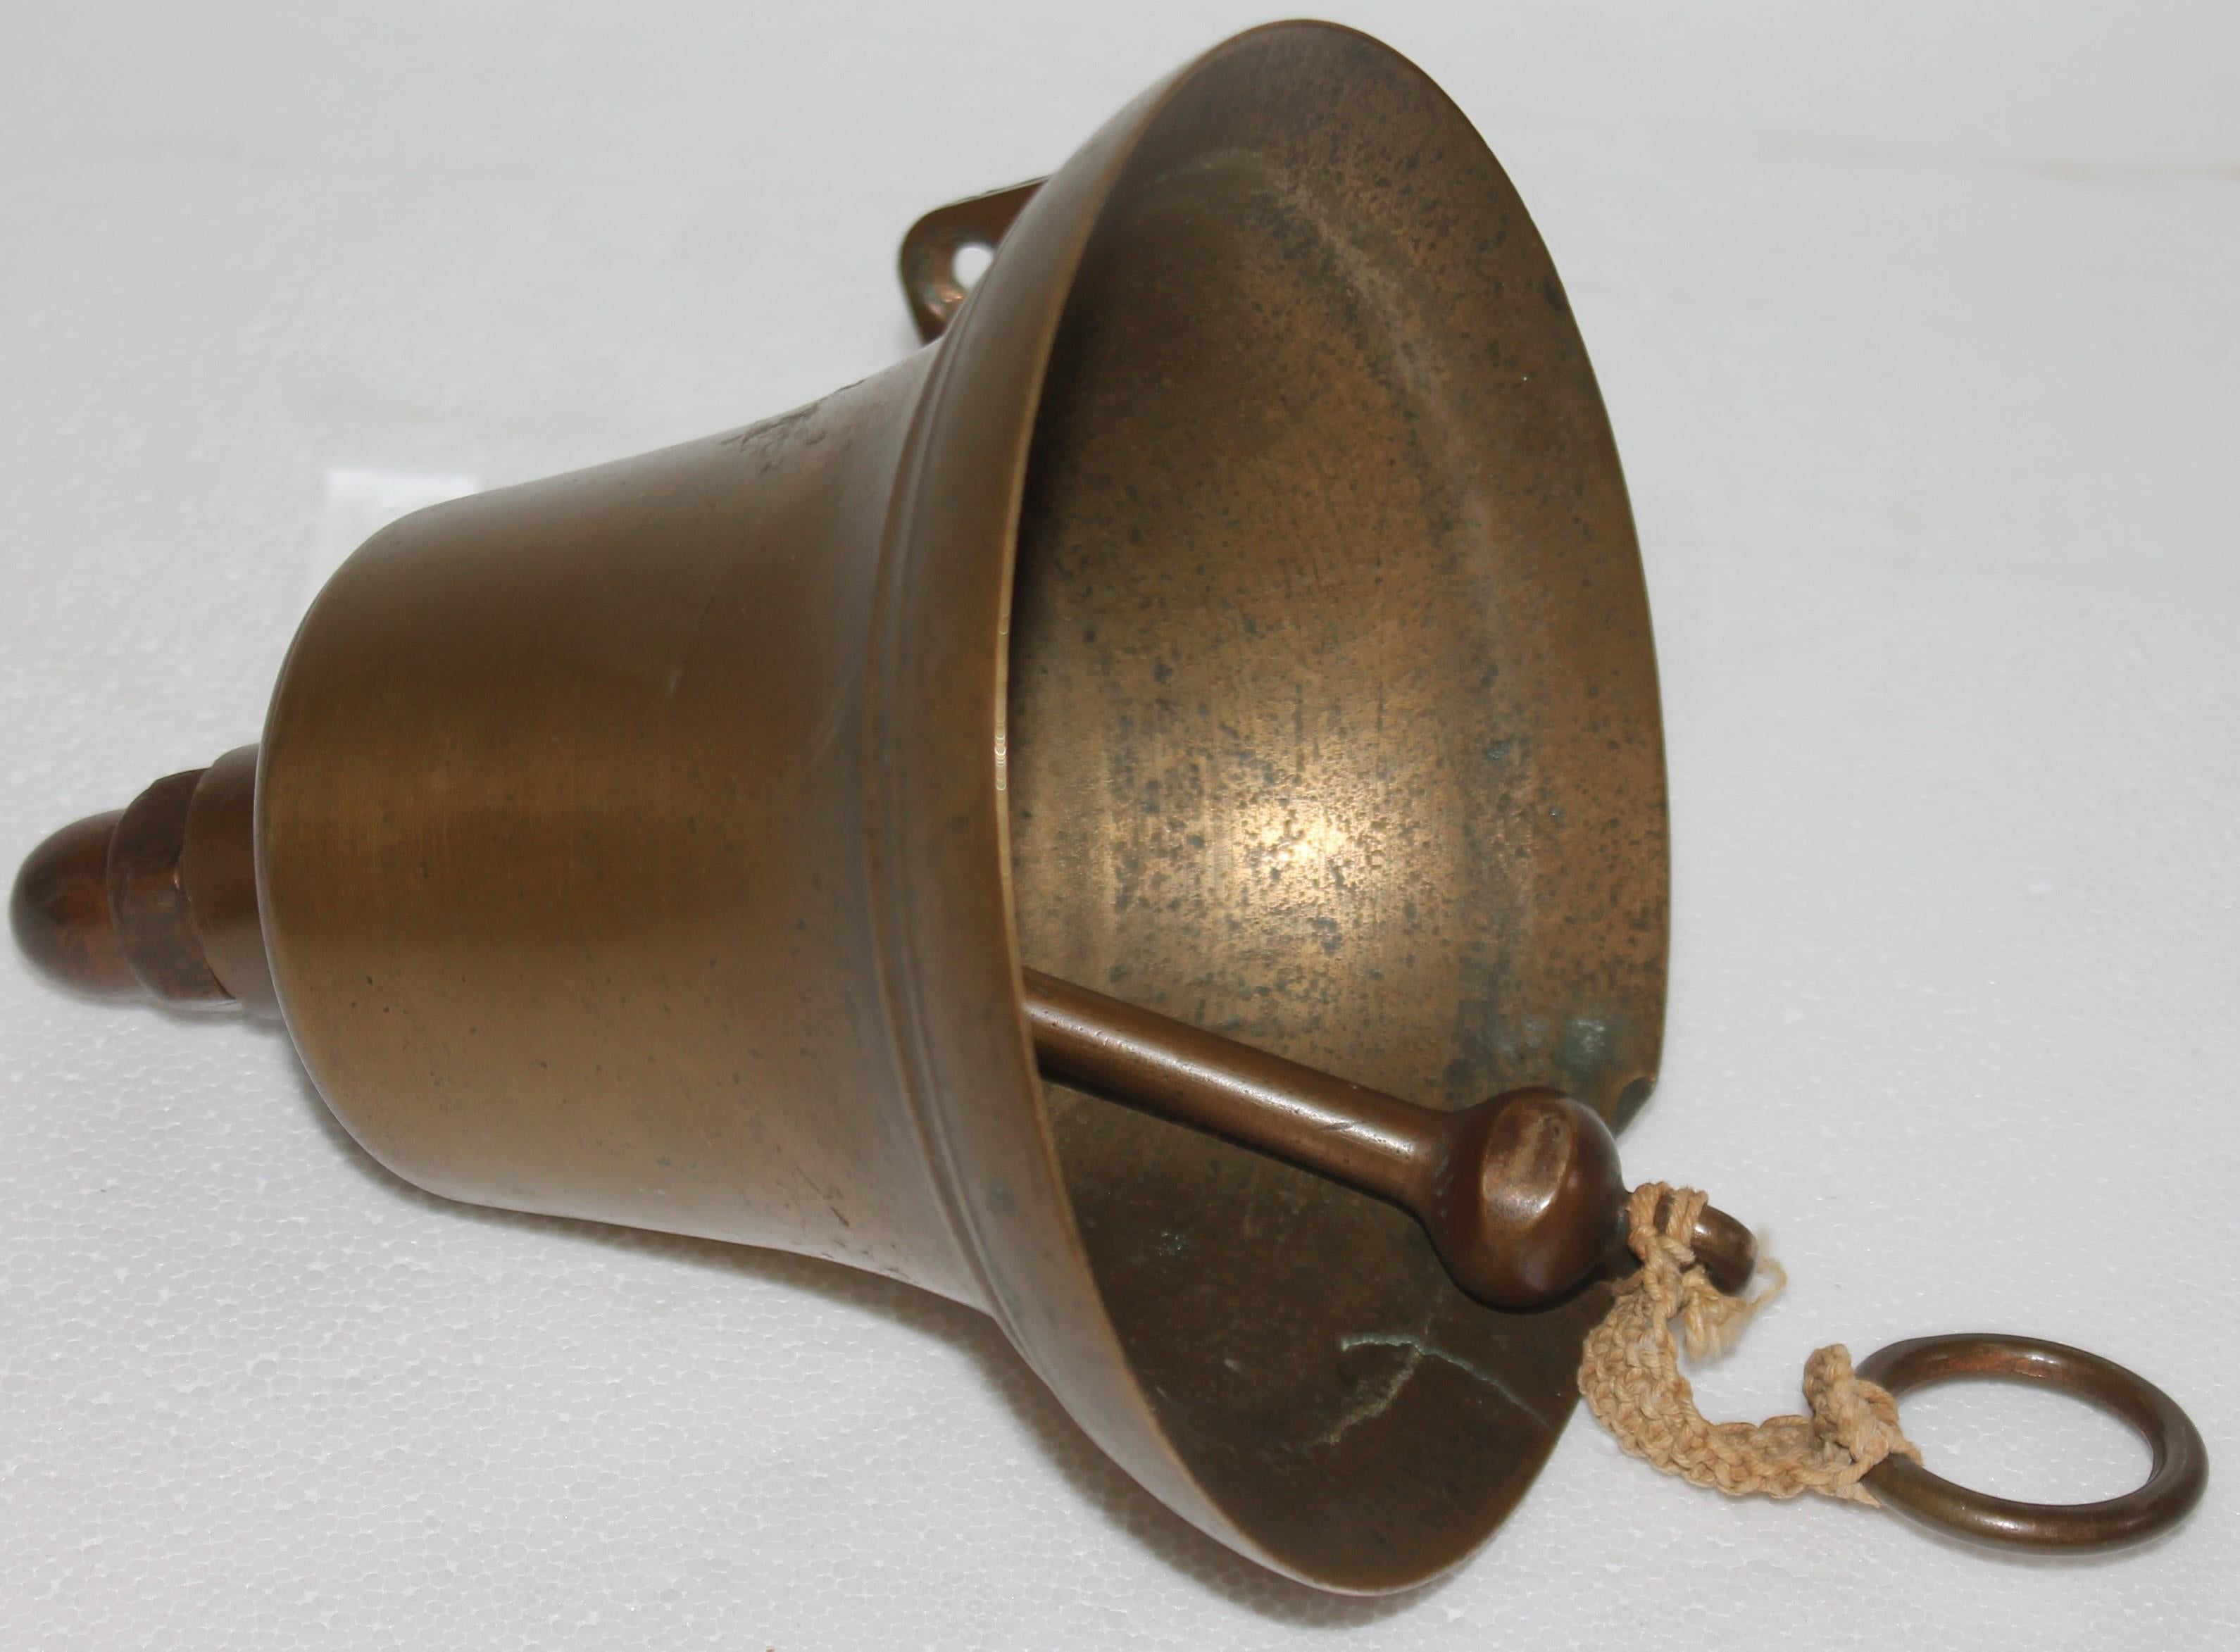 20thc Ships brass bell with rope for a ringer. This could be a dinner bell on the front of a house or mounted on the front of the house.